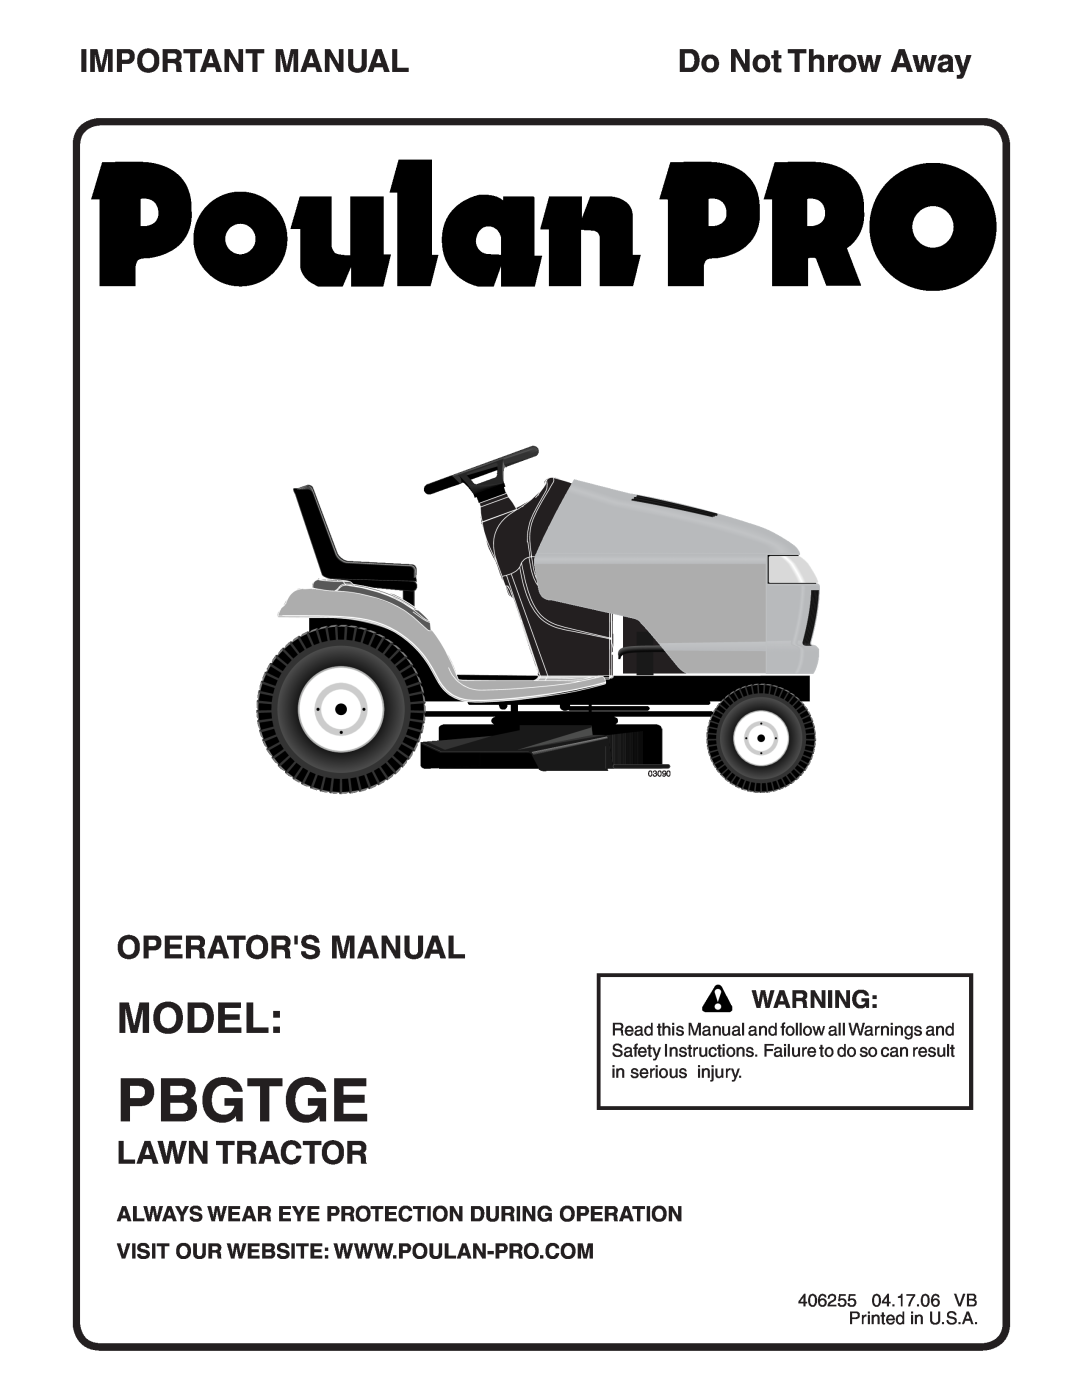 Poulan PBGTE manual Model, Important Manual, Operators Manual, Lawn Tractor, Always Wear Eye Protection During Operation 